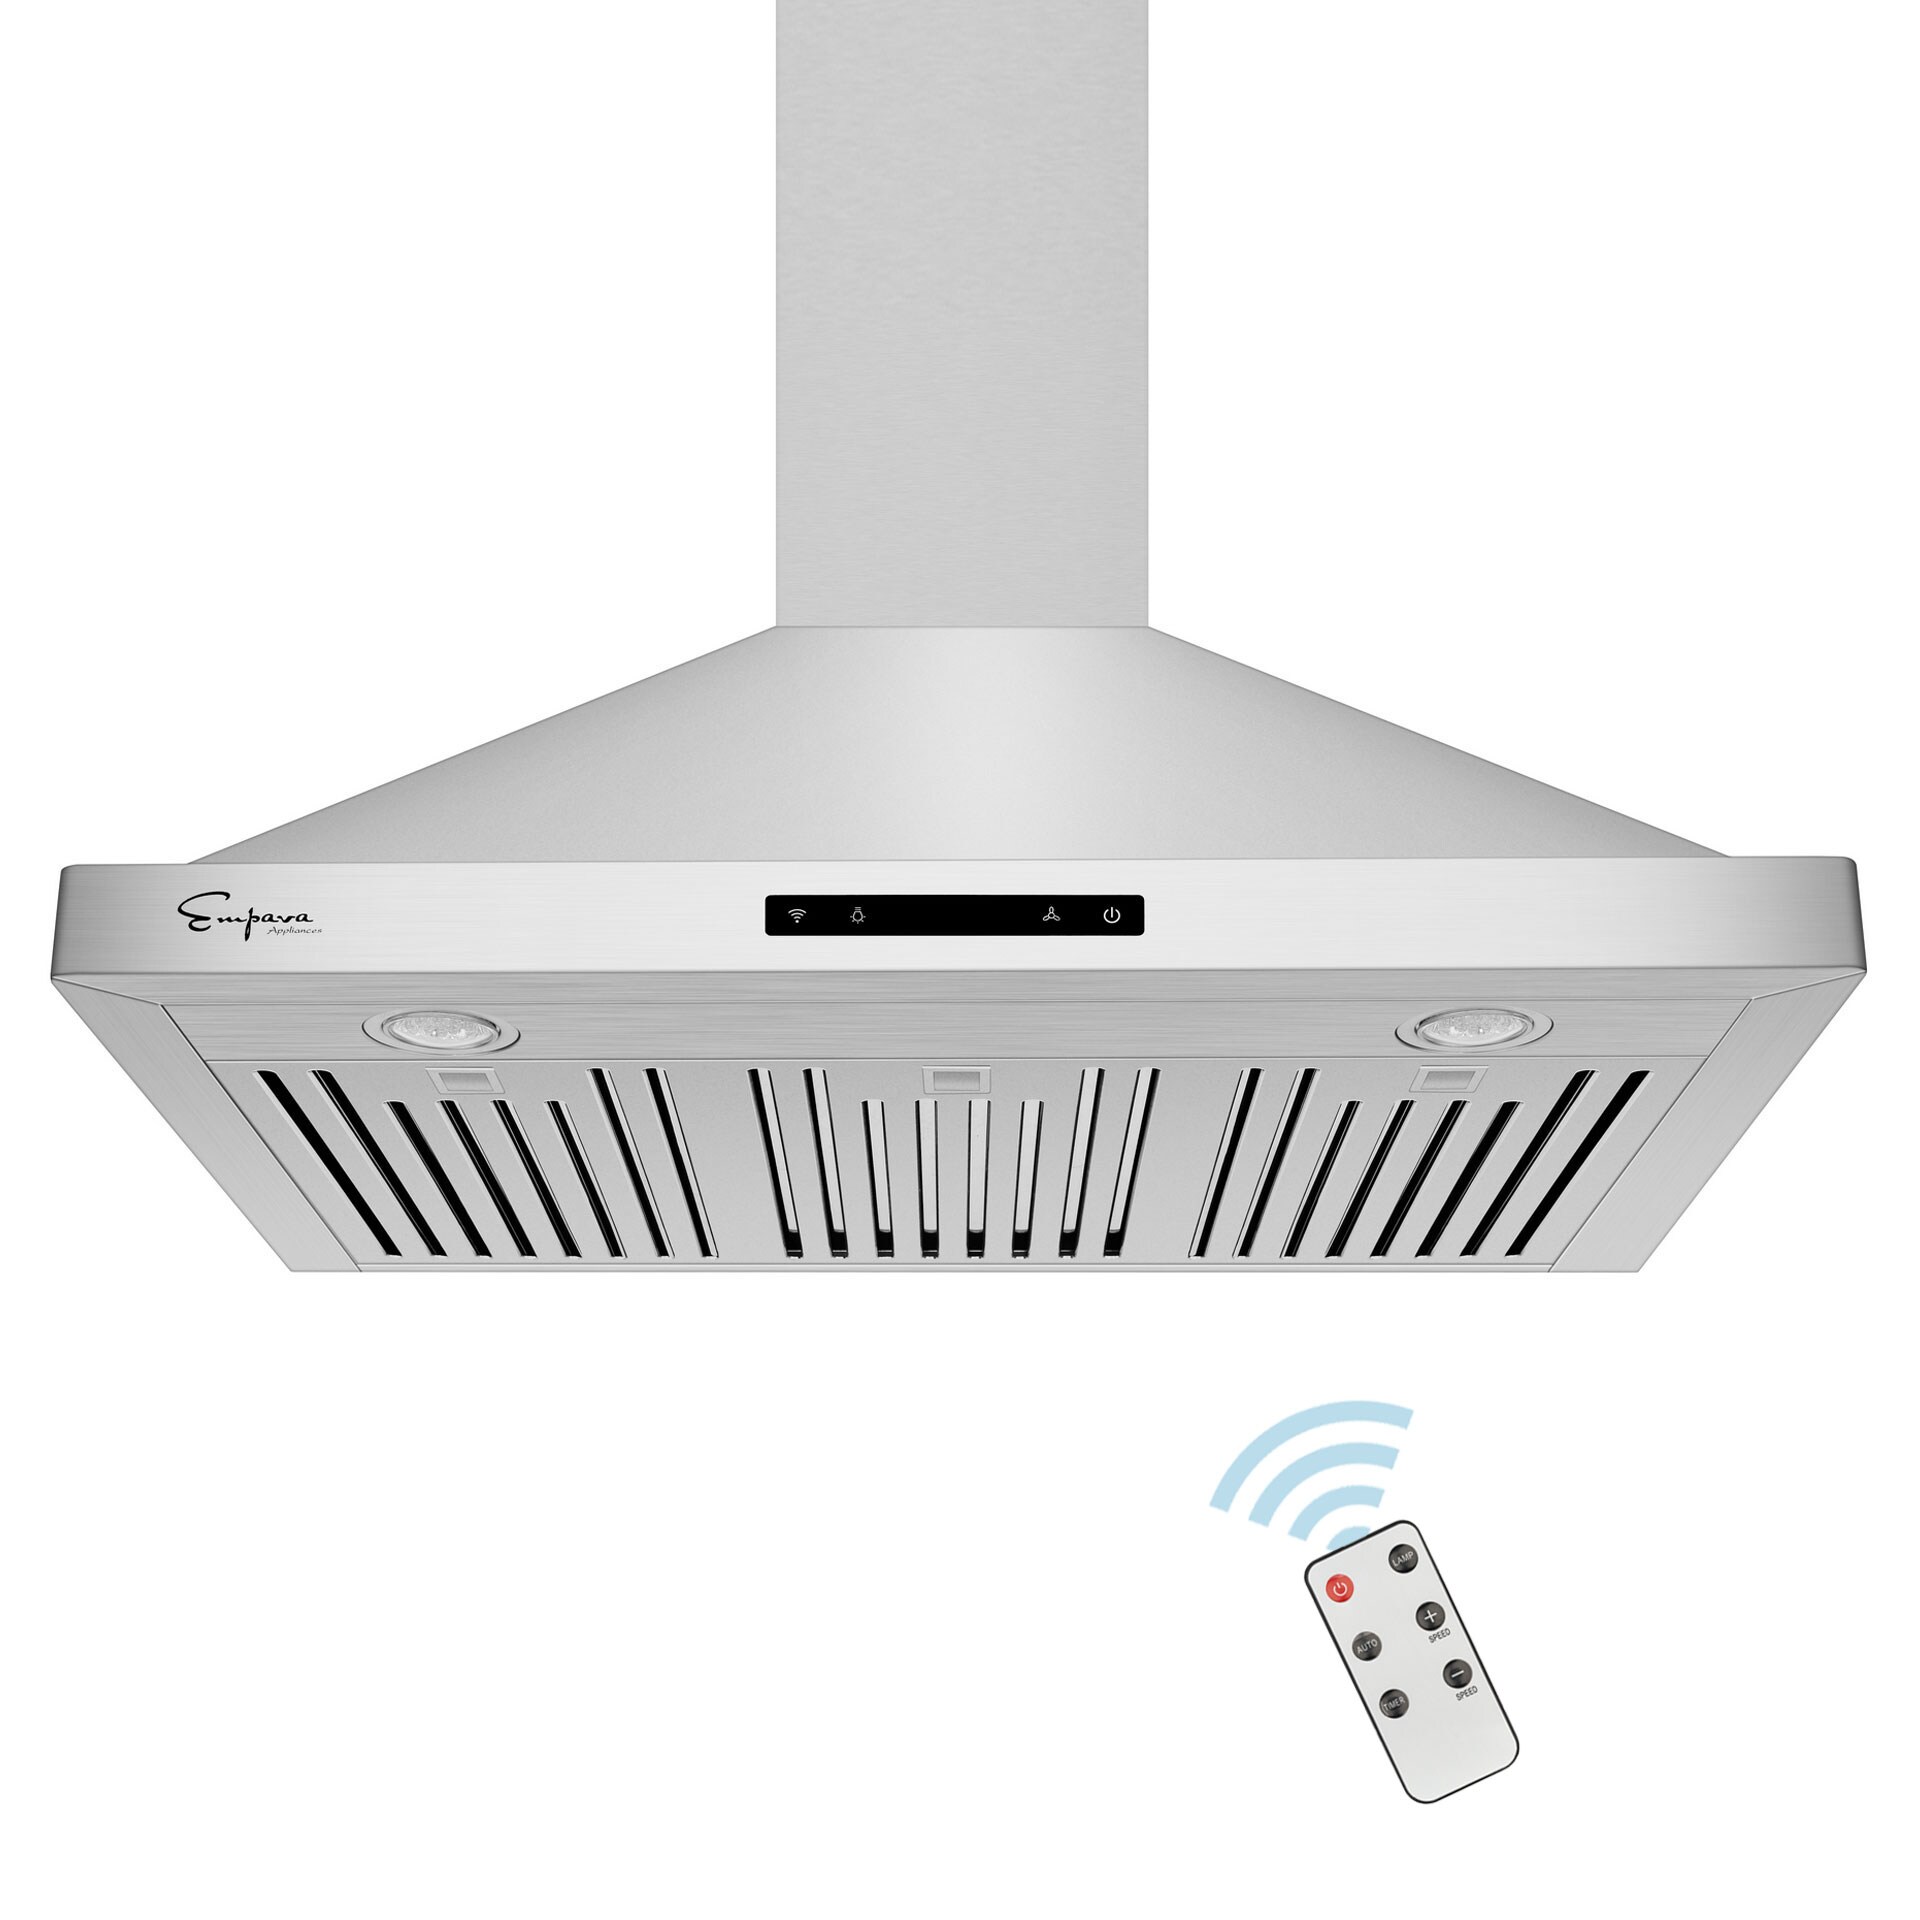 Empava 36 Island Range Hood Ducted Exhaust Kitchen Vent-Tempered Glass-Soft Touch Controls-3 Speed Fan-Permanent Filter LEDs Light in Stainless Steel 